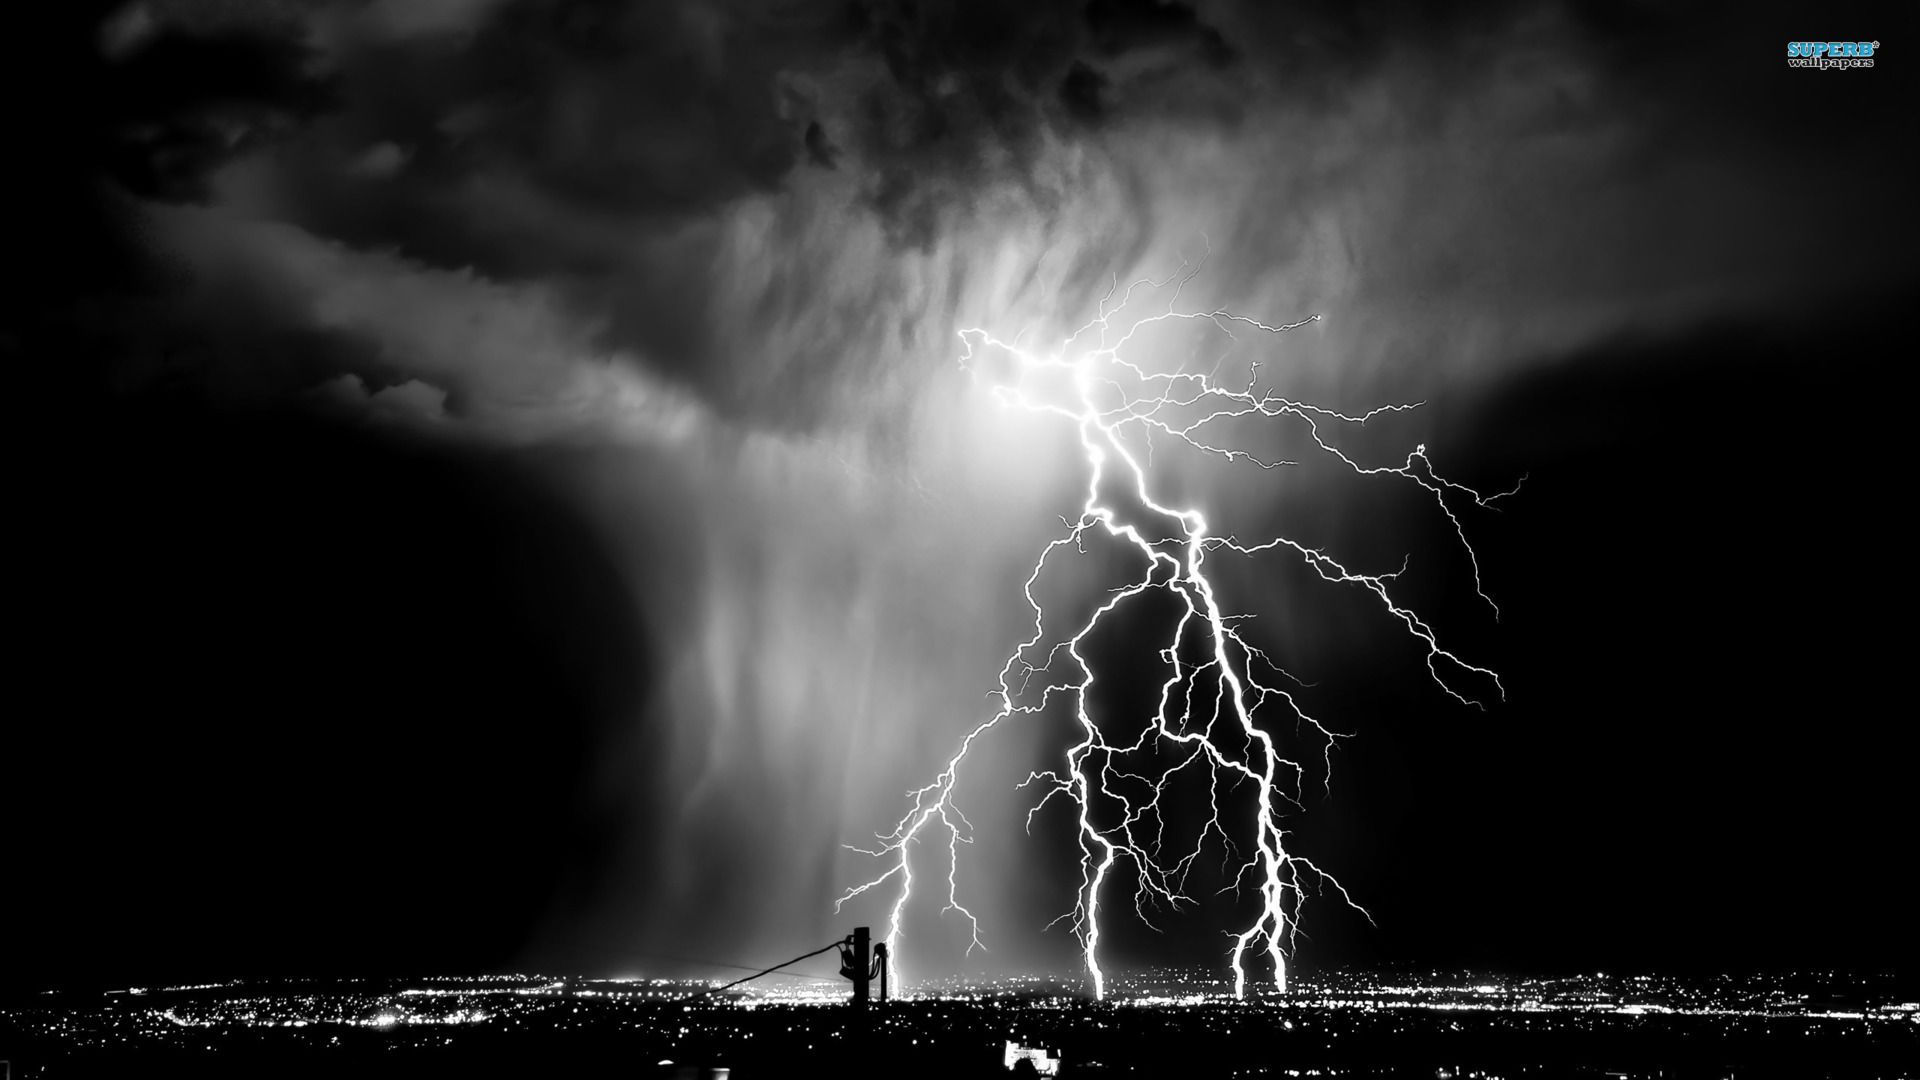 Lightning over the city wallpaper - Photography wallpapers - #16518